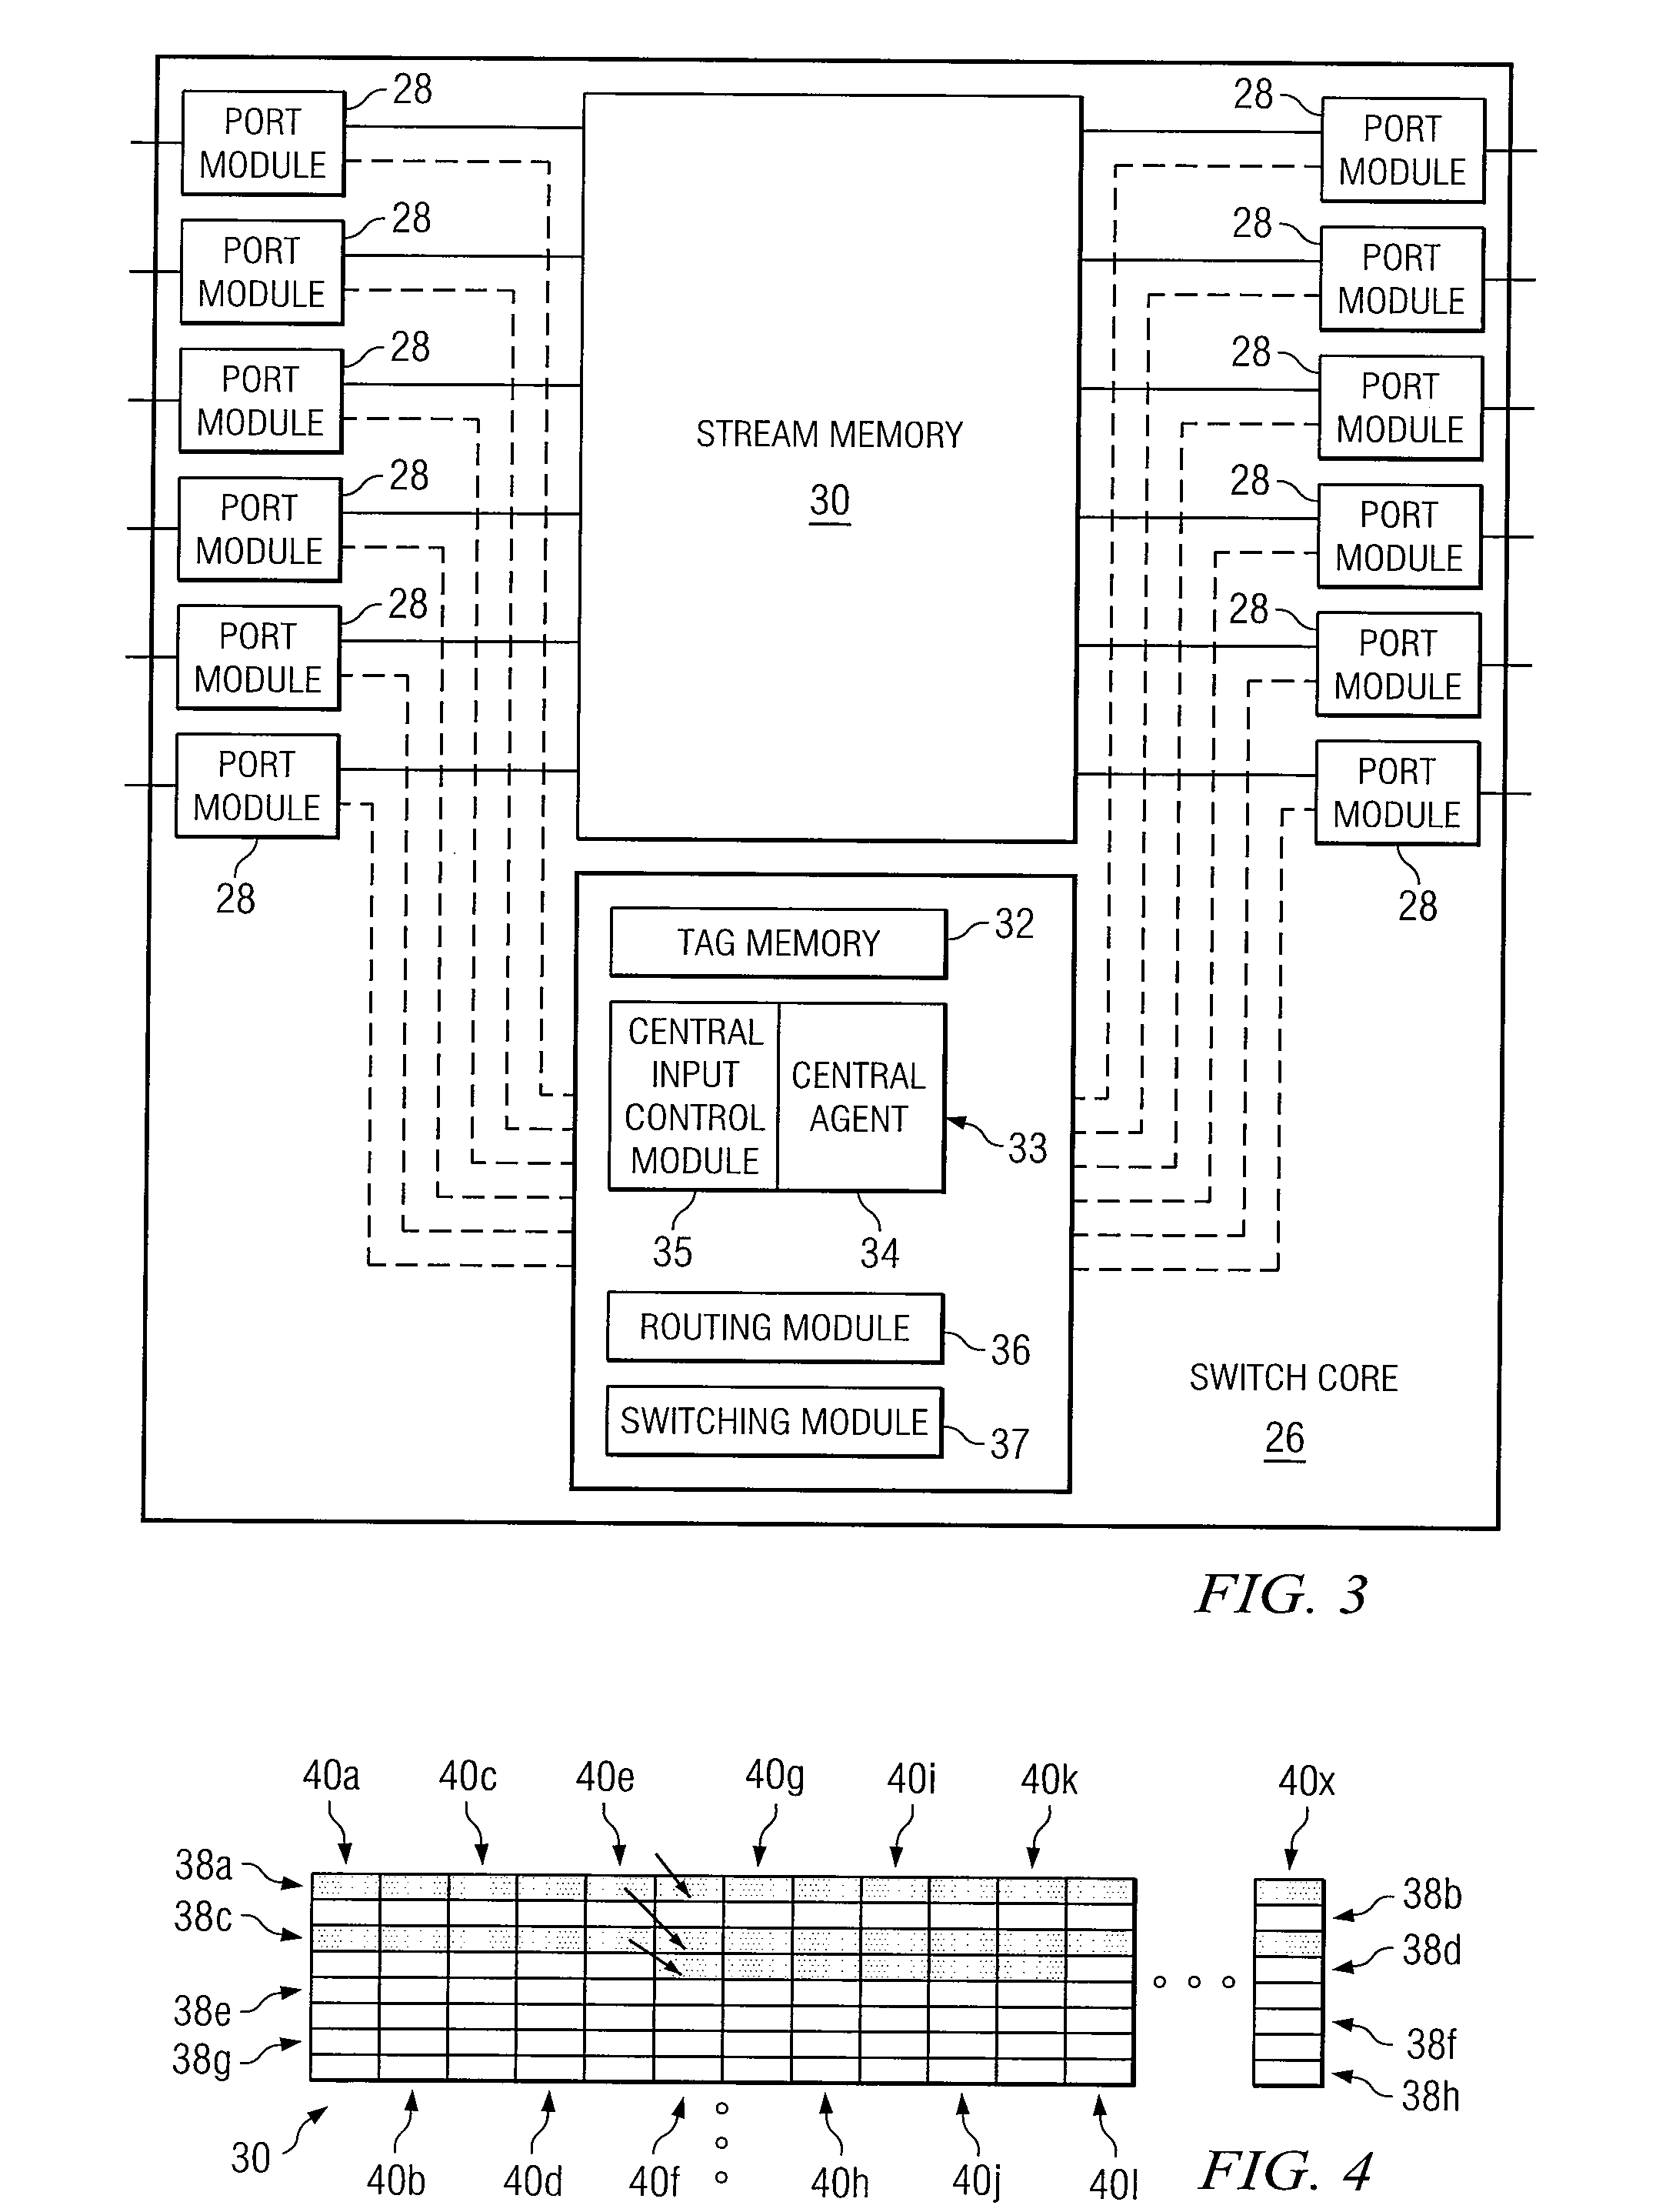 System and Method for Allocating Memory Resources in a Switching Environment